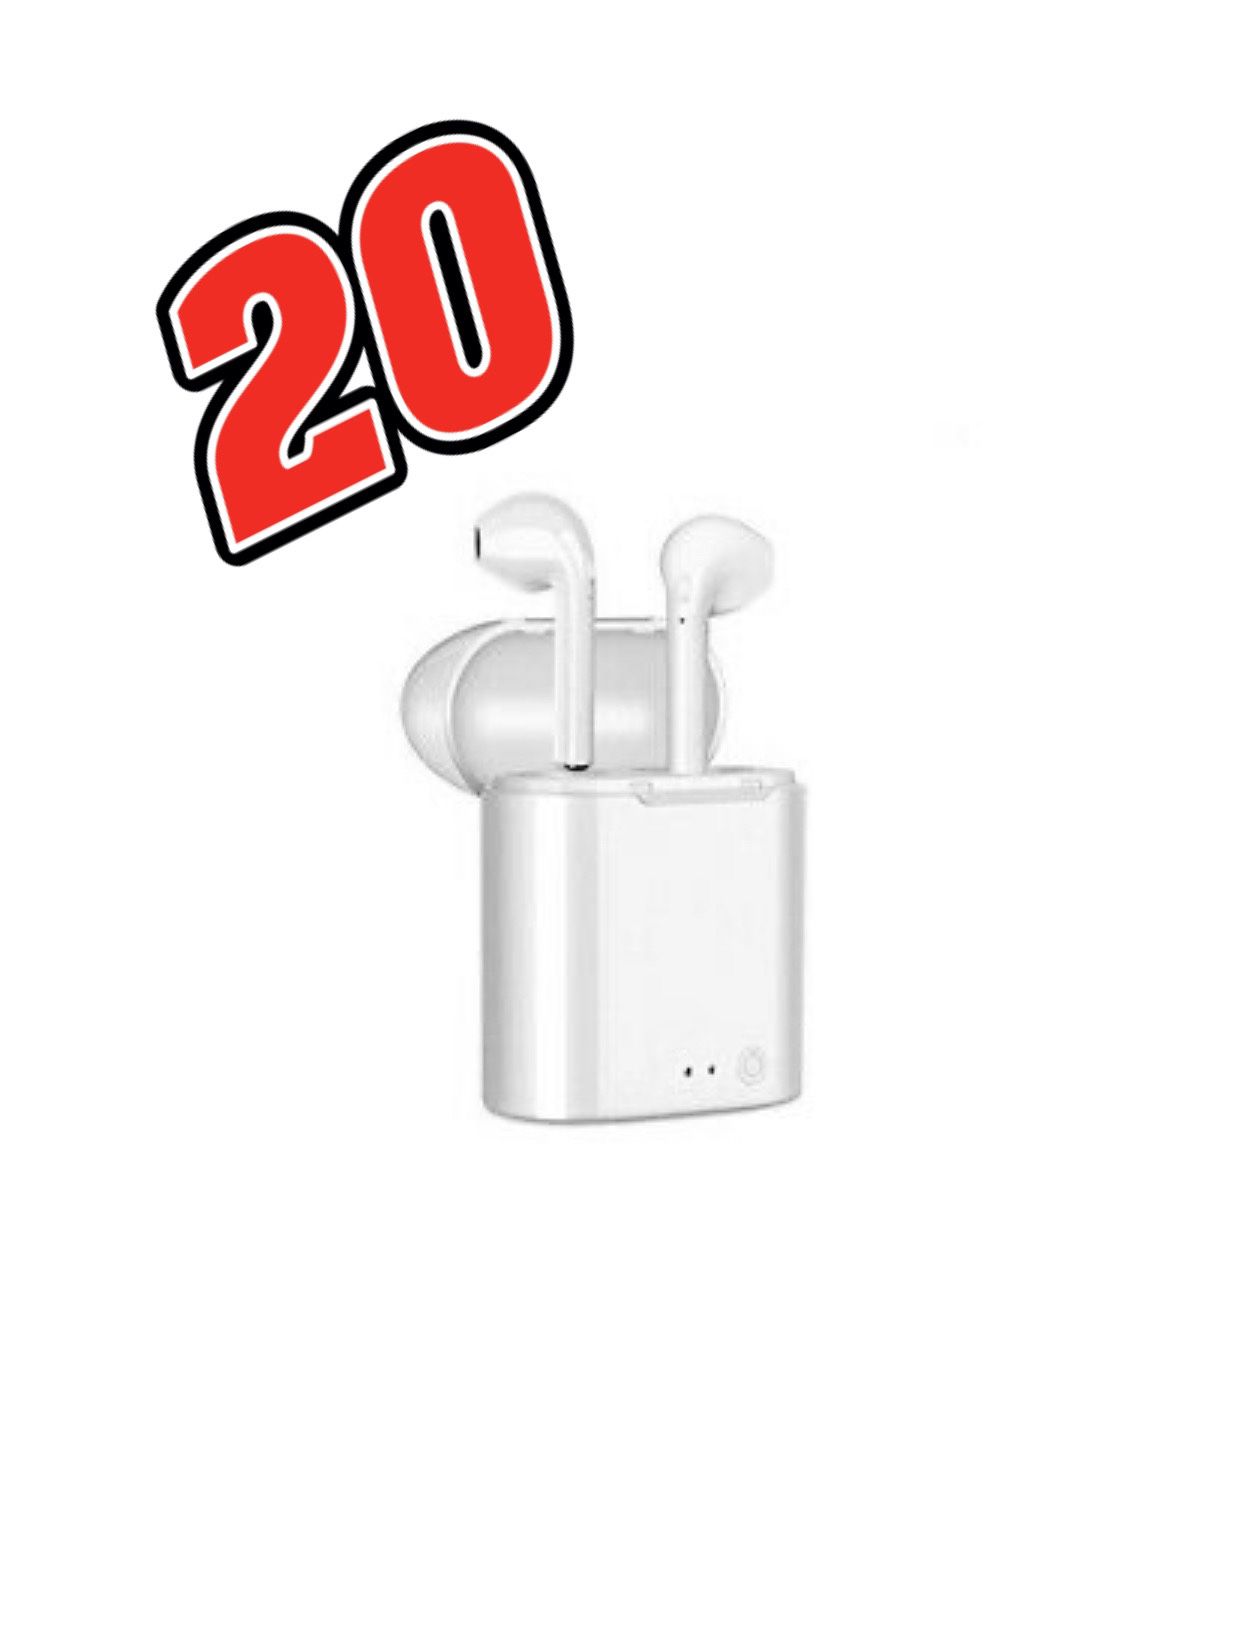 BLUETOOTH WIRELESS EARBUDS unbranded/generic AirPods